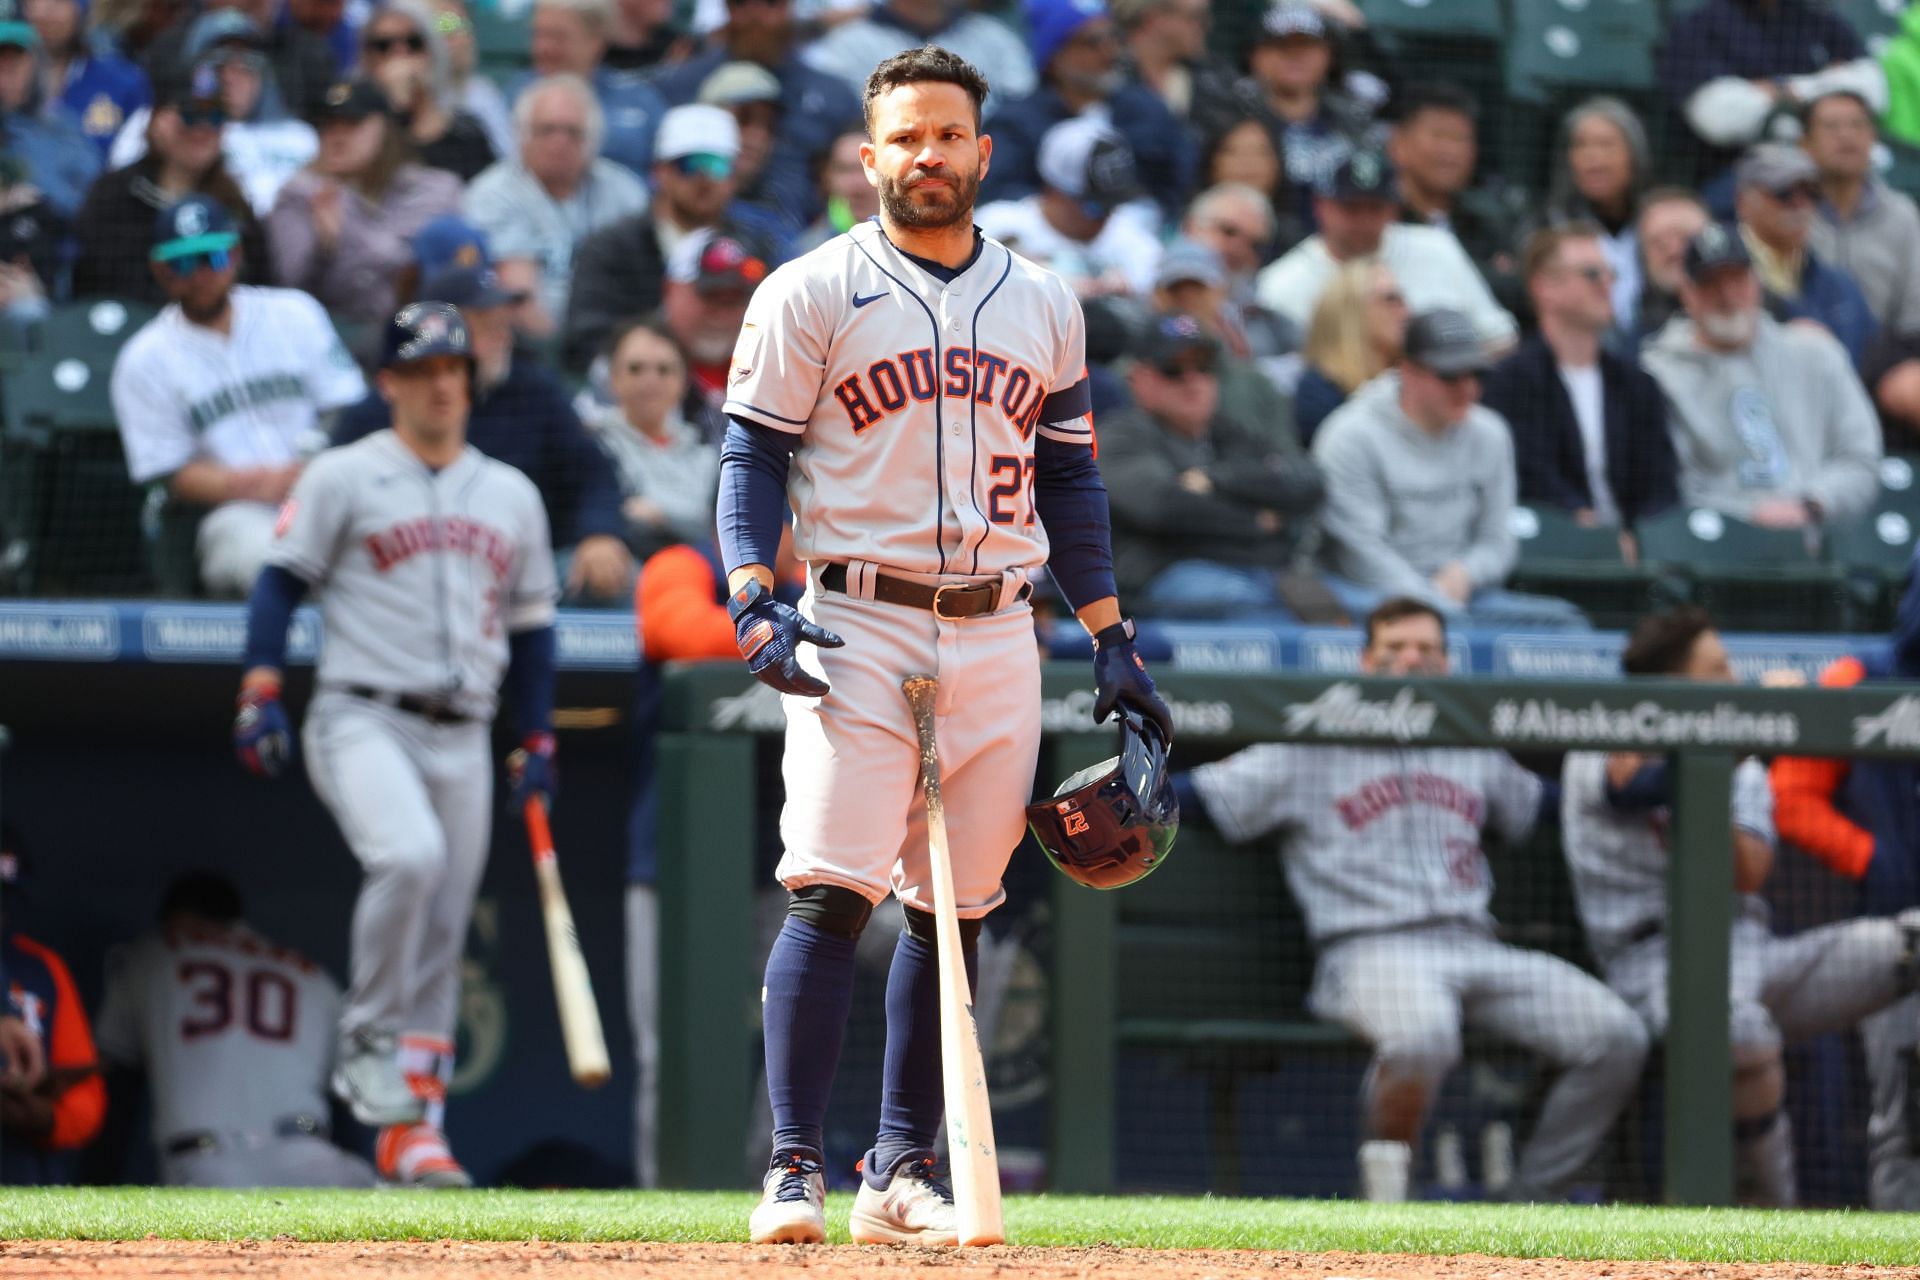 Jose Altuve # 27 of the Houston Astros bats against the Seattle Mariners